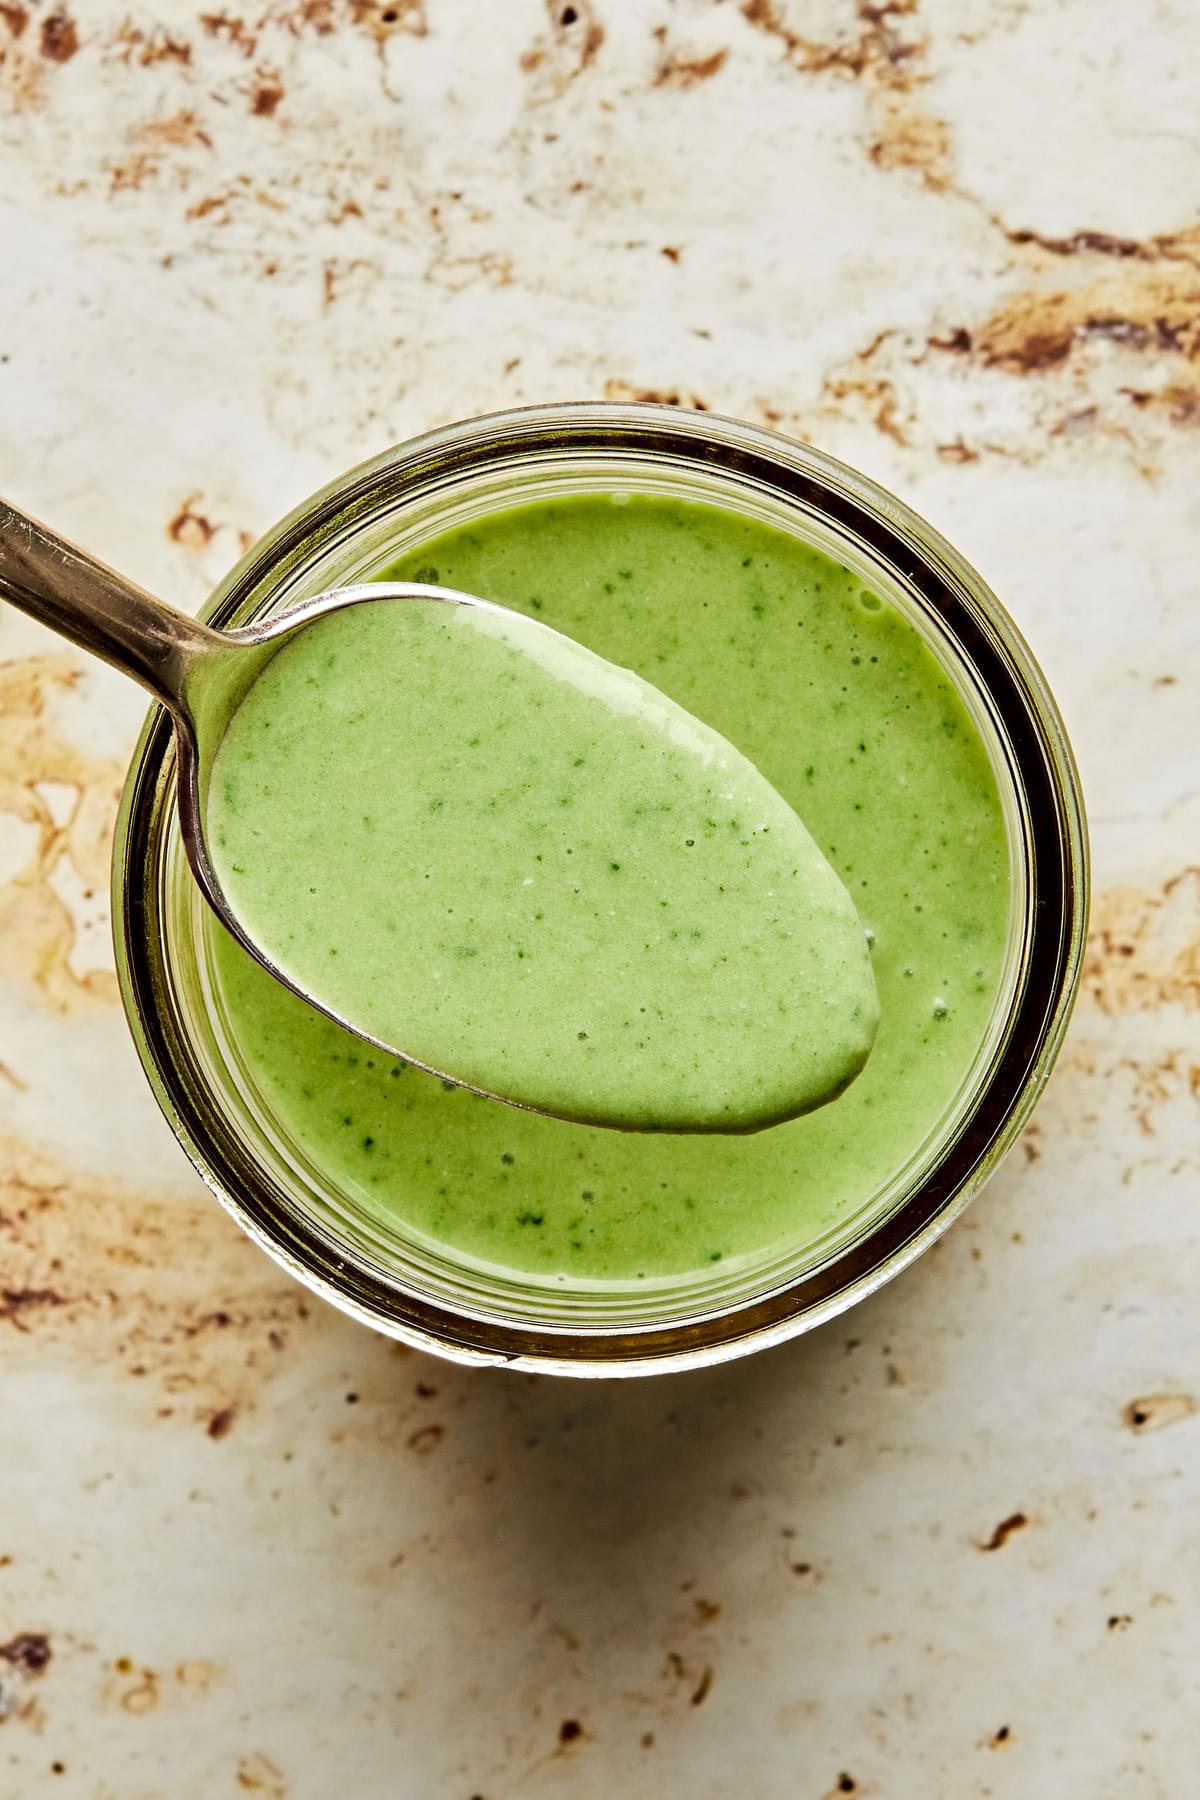 homemade green goddess dressing in a glass jar being scooped with a spoon